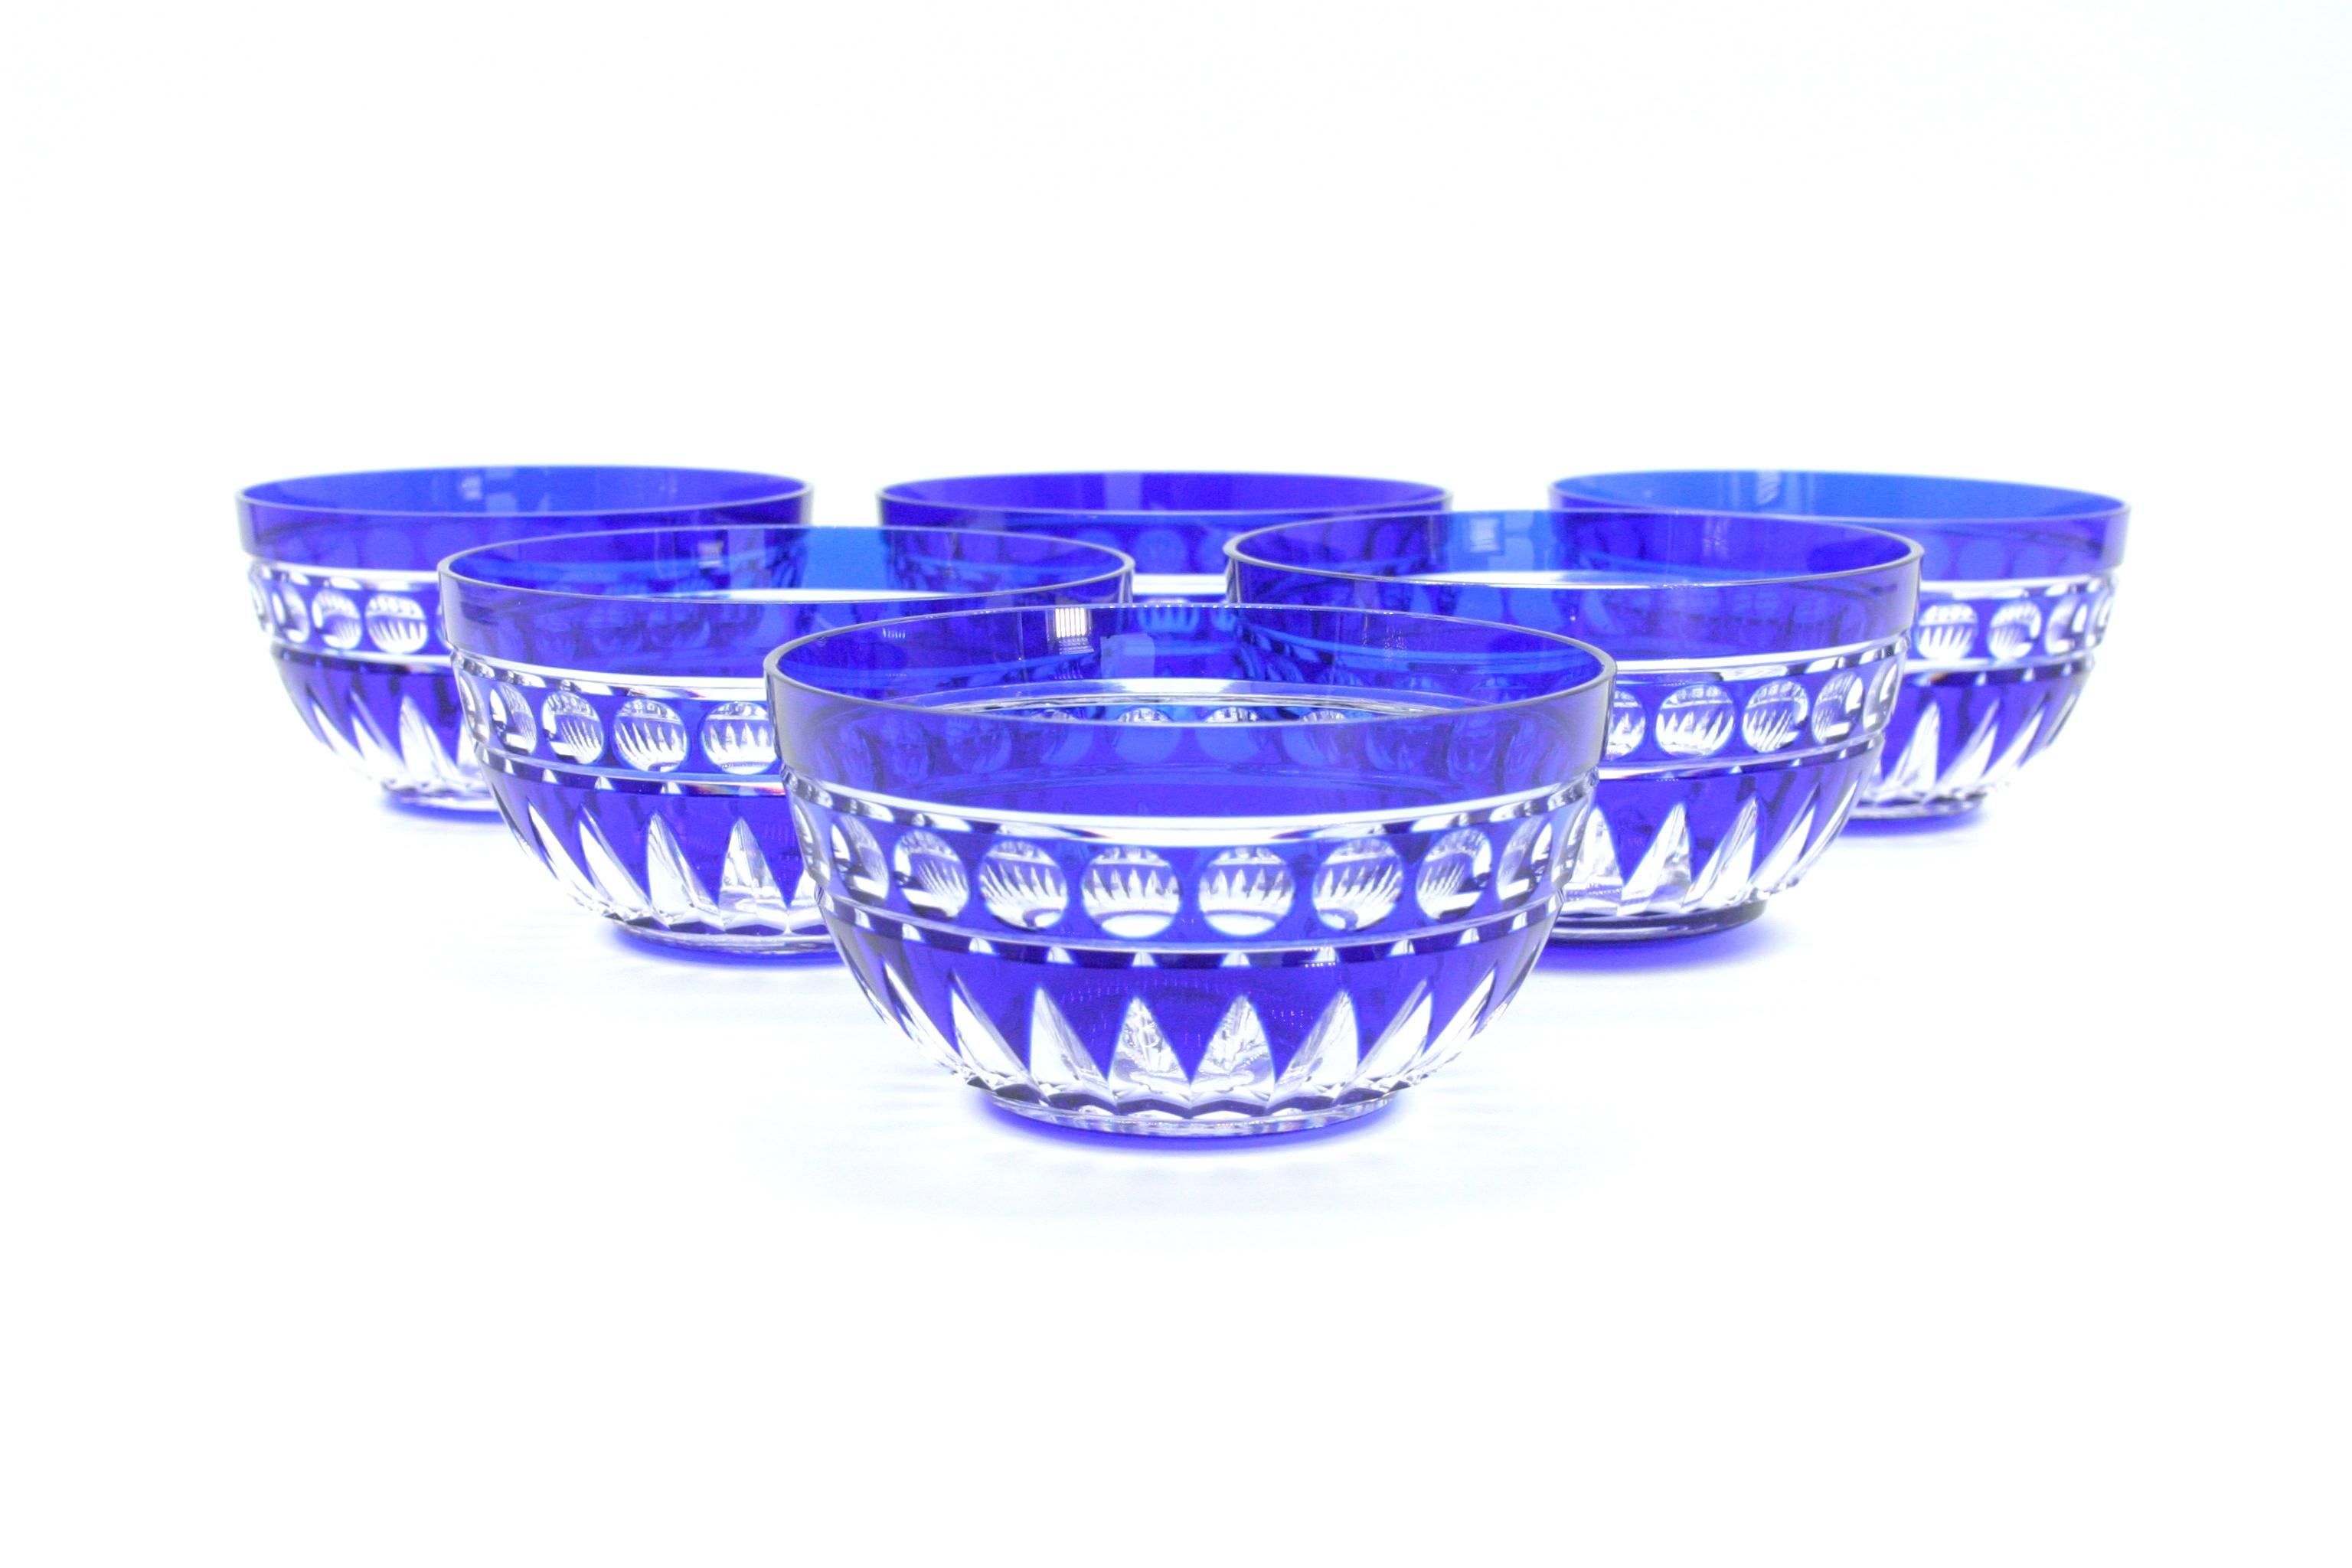 Cut Crystal Tableware Serving Bowl Service / 9 People For Sale 6